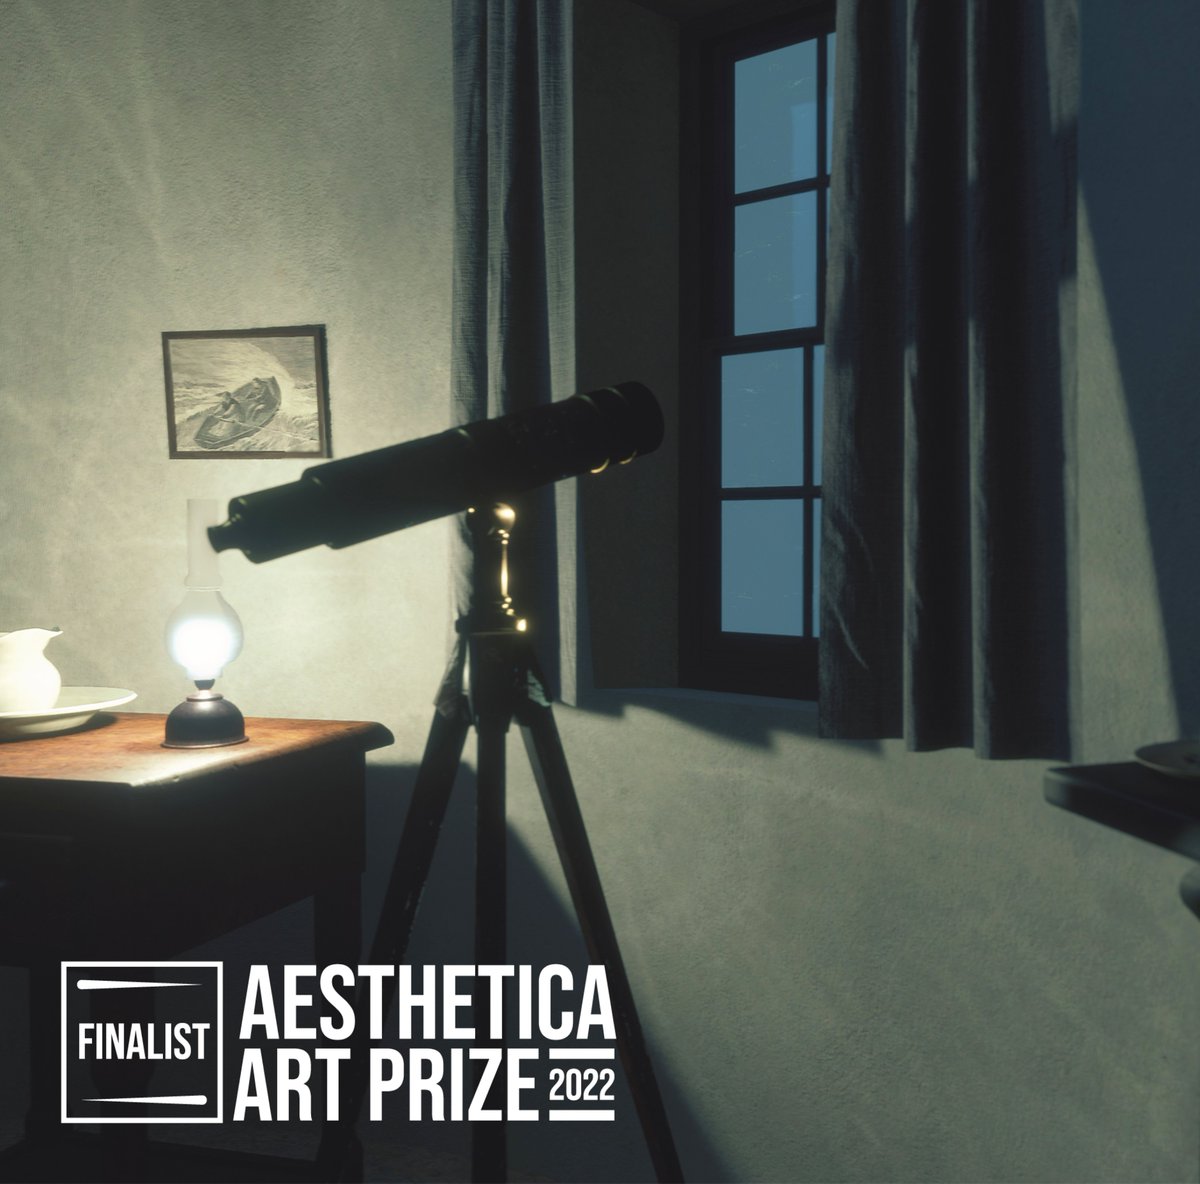 Happy to share that ‘Grace’ is a finalist for the @AestheticaMag Art Prize 2022. My short film will be included in a group show @yorkartgallery running from 24 June until 18 September. Free tickets and more info here: aestheticamagazine.com/exhibition-202…